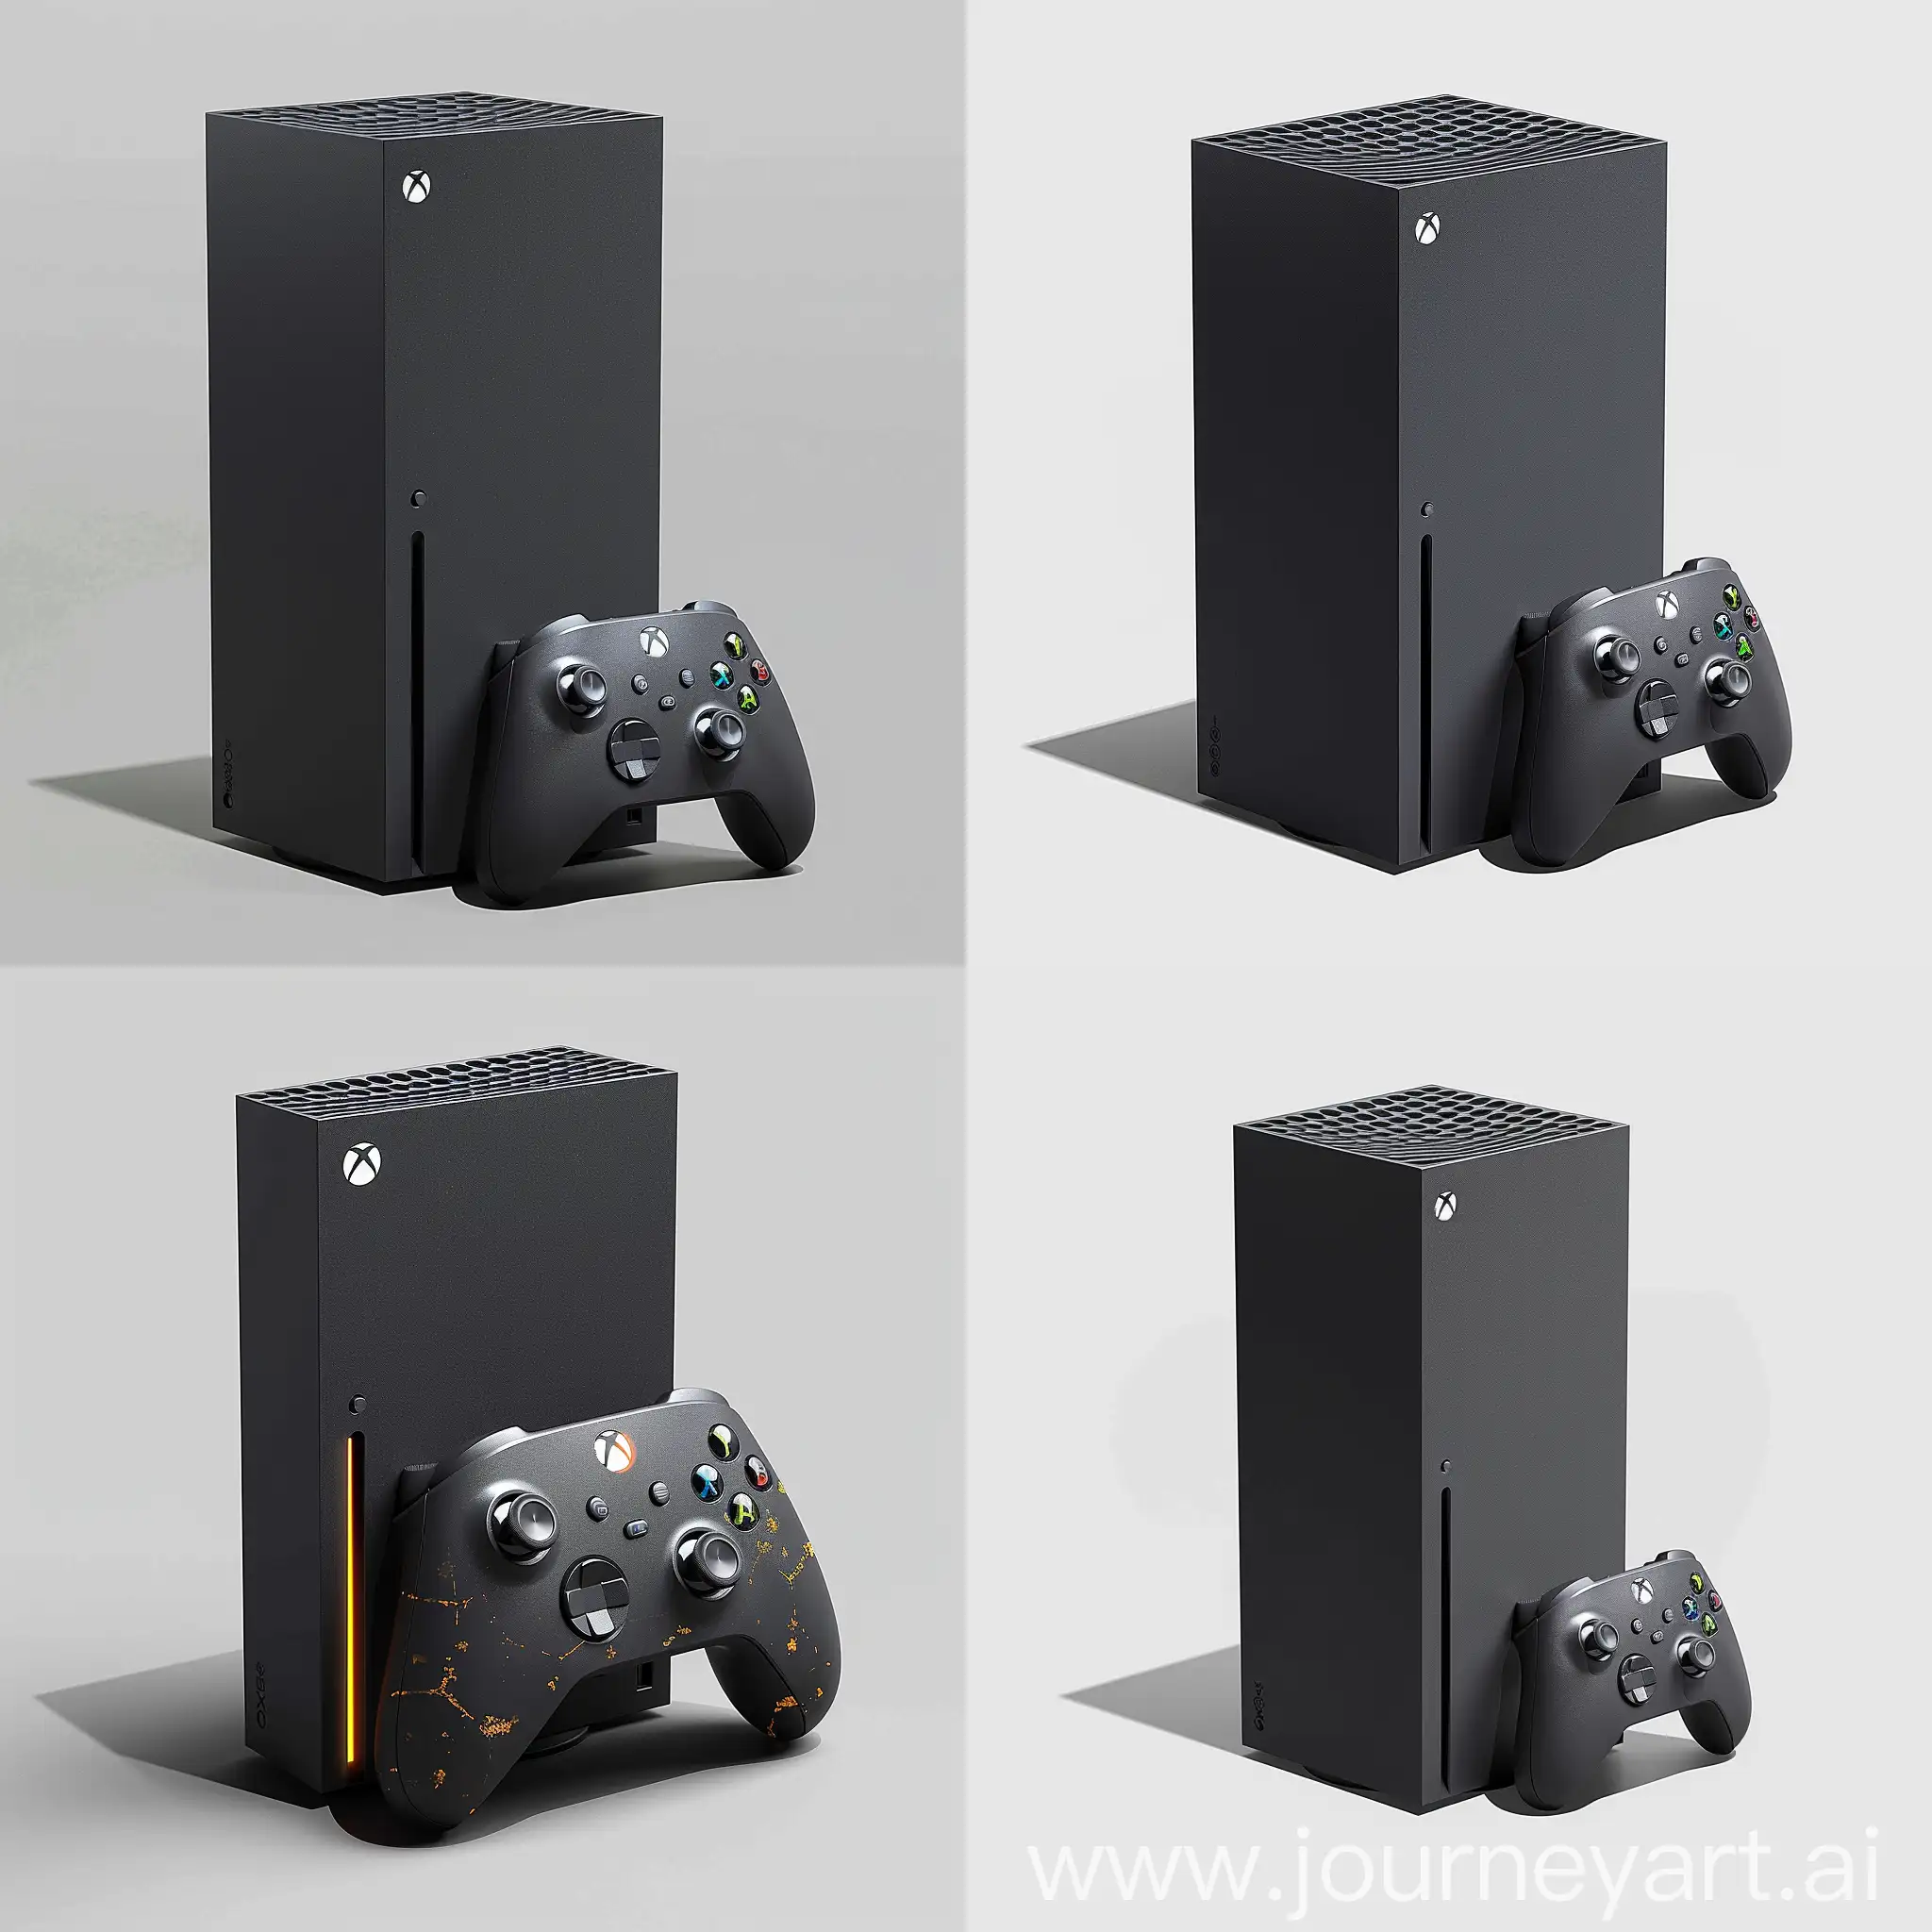 Futuristix Xbox Series X https://images-cdn.ubuy.co.in/650031d006906f37774b9024-2020-new-xbox-x-gaming-console.jpg:: sci-fi style, science fiction, 4K Gaming, Ray Tracing, Variable Rate Shading, Quick Resume, SSD Storage, Backward Compatibility, Smart Delivery, Dolby Atmos and DTS:X Support, Variable Refresh Rate, Xbox Game Pass, Quantum Resolution, Nebula Ray Tracing, Hyperdrive Vortex Shading, Chrono-Shift Quick Resume, Nano-Byte SSD Storage, Retro-Fusion Compatibility, Neural Link Smart Delivery, Cyber-Sound Atmos, Infinity Warp Refresh Rate, Galactic Game Pass, octane render --stylize 1000